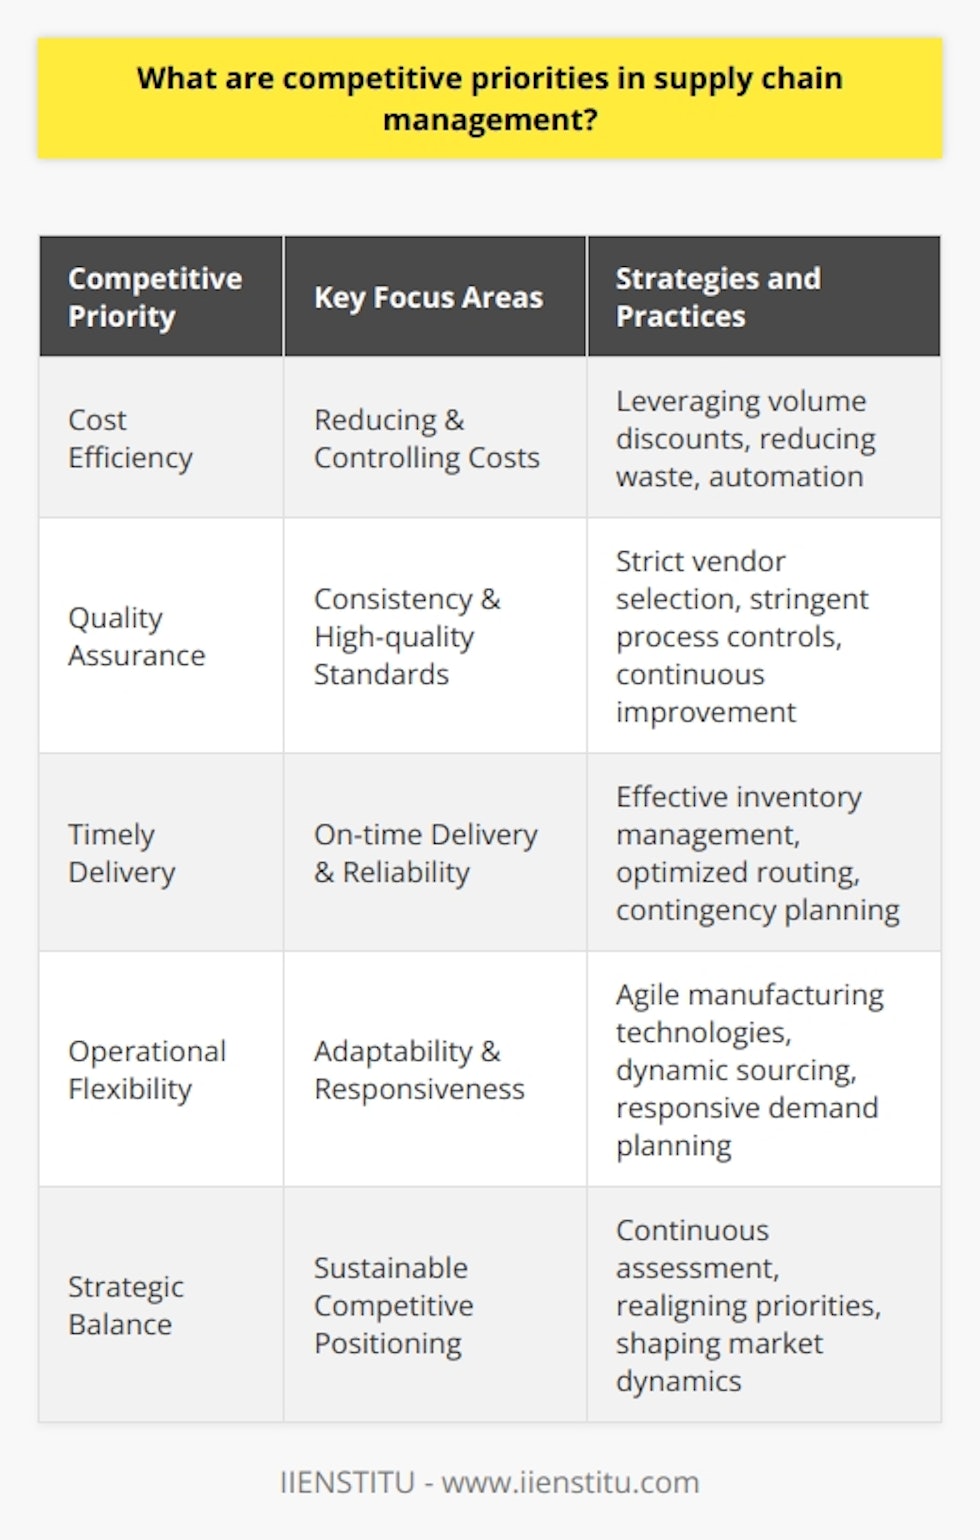 Competitive priorities in supply chain management are vital aspects that companies focus on to maintain a strong presence among competitors and serve their customers effectively. In the complex global economy, supply chains are foundational to a business's operational success and customer satisfaction. Here are the four primary competitive priorities that form the bedrock of strategic supply chain management:Cost EfficiencyReducing and controlling costs are essential priorities for businesses to remain competitive. Effective supply chain management aims to optimize all areas of costs—procurement, production, distribution, and logistics. Supply chain leaders strive to develop cost-reduction strategies without compromising on quality or efficiency. Leveraging volume discounts, reducing waste, and implementing automation are common ways to enhance cost efficiency in supply chains. Quality AssuranceQuality is a non-negotiable competitive priority that influences brand reputation and customer fidelity. Consistent quality assurance across the supply chain can be the difference between fostering customer loyalty and facing a loss of market share. High-quality standards involve strict vendor selection, stringent process controls, and continuous improvement initiatives. It is not just about the end product; each supply chain element must adhere to established quality benchmarks to ensure final product integrity.Timely DeliveryDelivering products to customers at the right time and location is a competitive imperative. On-time delivery is a benchmark used by customers to judge a company's reliability and operational excellence. Supply chains must be designed and managed to minimize delays and accelerate throughput. Effective inventory management, optimized routing, and contingency planning for disruptions are some strategies used to maintain prompt delivery schedules.Operational FlexibilityIn a rapidly changing market environment, flexibility is a competitive priority that can make or break a company's ability to meet customer demands. Flexibility in supply chain management means being able to adjust and respond swiftly to market trends, demand variability, and supply disruptions. Flexible supply chain operations may involve investing in agile manufacturing technologies, dynamic sourcing strategies, and responsive demand planning systems.Businesses often struggle to balance these competitive priorities, as excelling in one area can sometimes compromise another. A supply chain that delivers high-quality products with flexible options may find it challenging to compete on cost, for example. It is hence essential to strike a strategic balance, continuously assessing and realigning these priorities to meet current market demands and organizational goals.In conclusion, competitive priorities in supply chain management—cost efficiency, quality assurance, timely delivery, and operational flexibility—are interrelated pillars central to a company's operational strategy and customer fulfillment process. Mastering these priorities is key to developing resilient, efficient, and customer-focused supply chains that not only respond to but anticipate and shape market dynamics. By giving undivided attention to these areas, organizations can carve out unique competitive positions and achieve sustainable success in their markets.